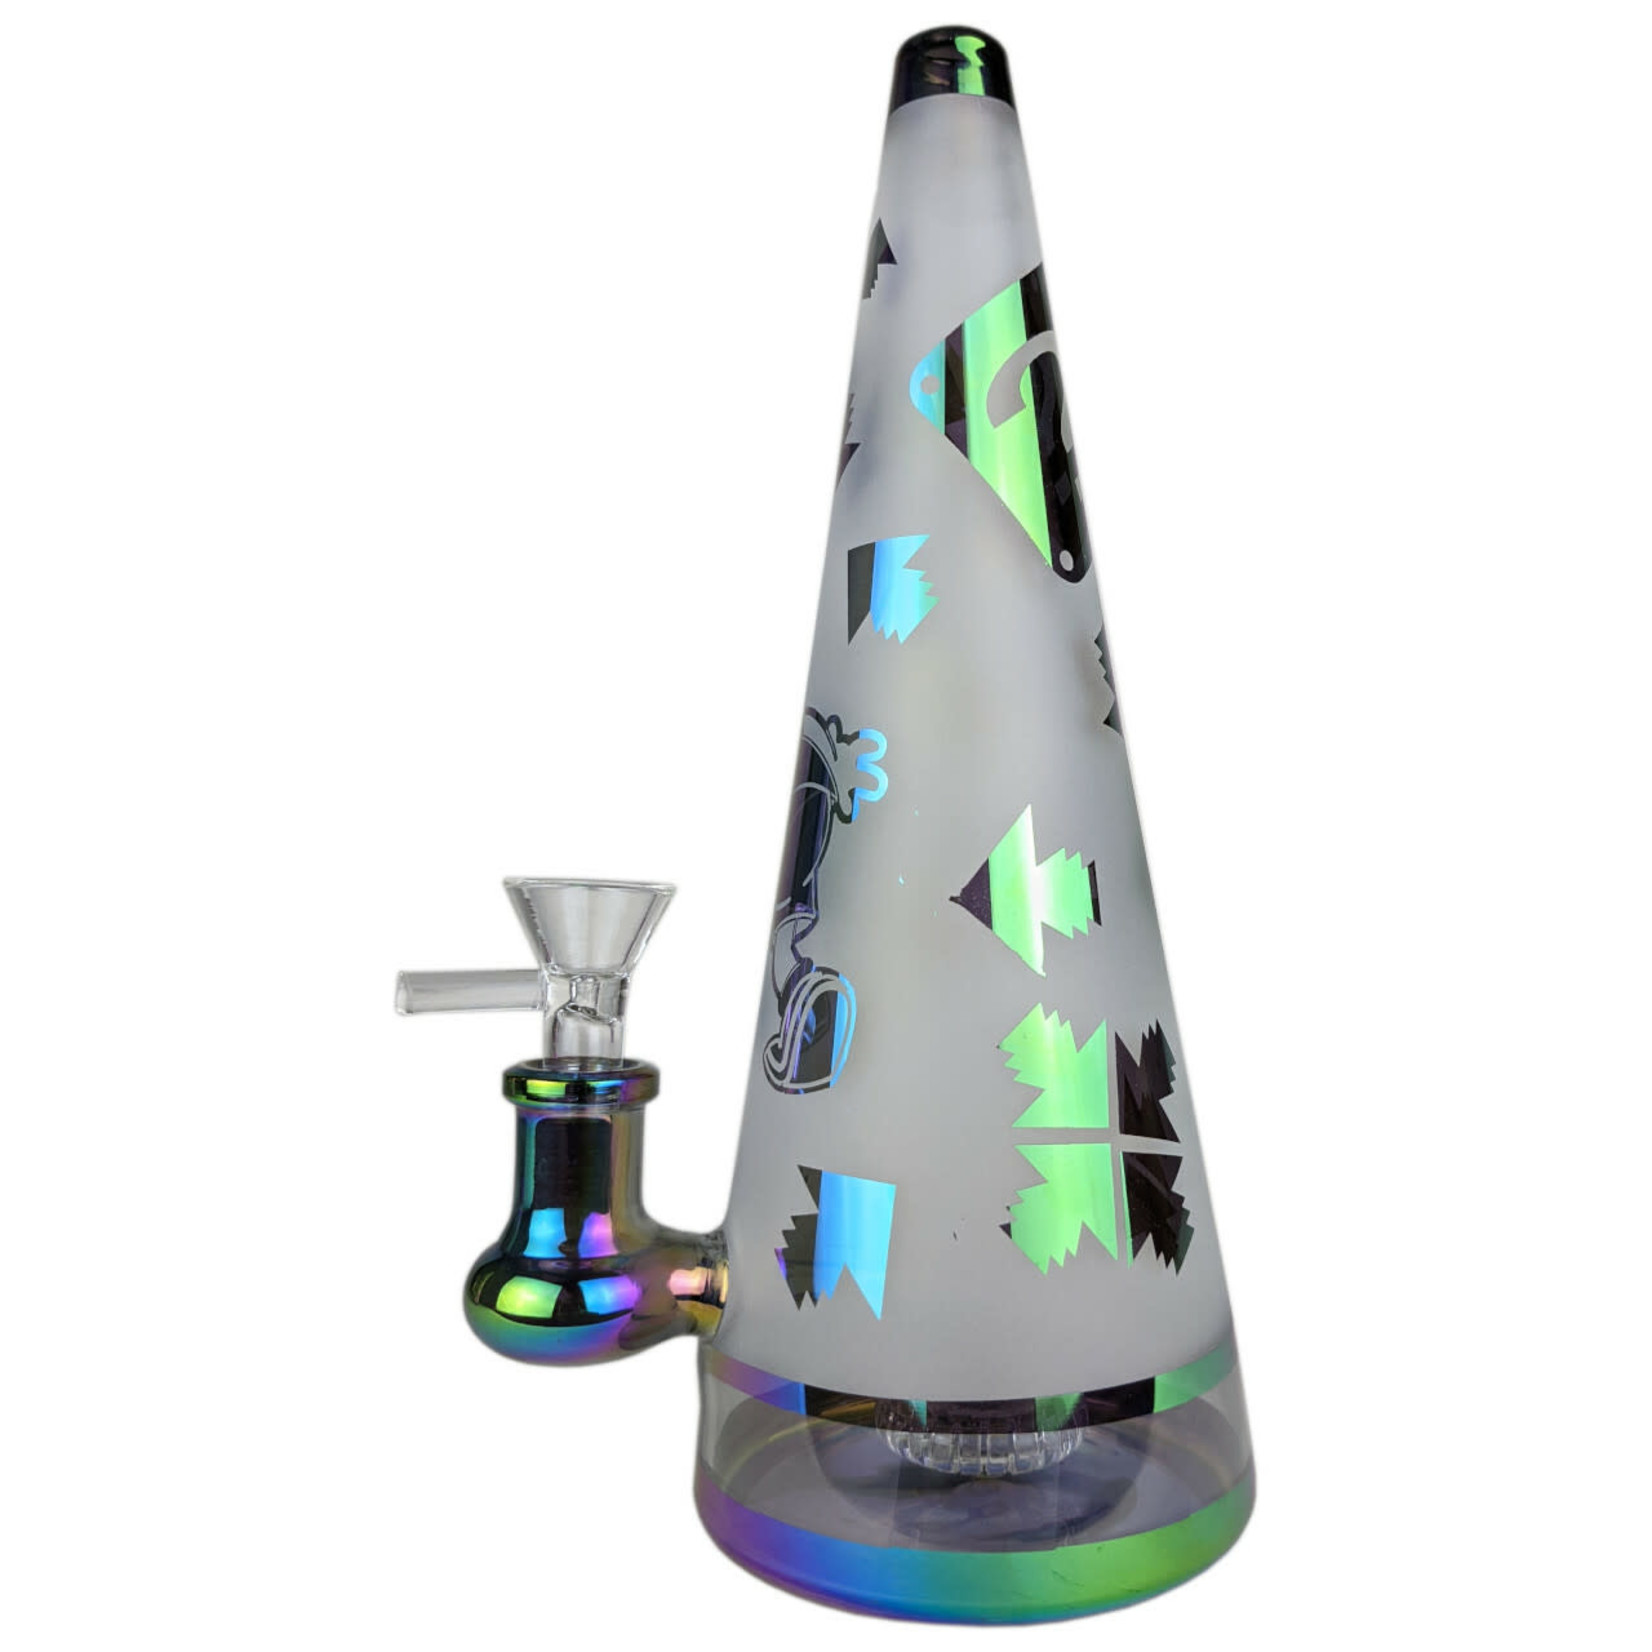 10” Sand Blasted Cartoon Games Decal Cone WP